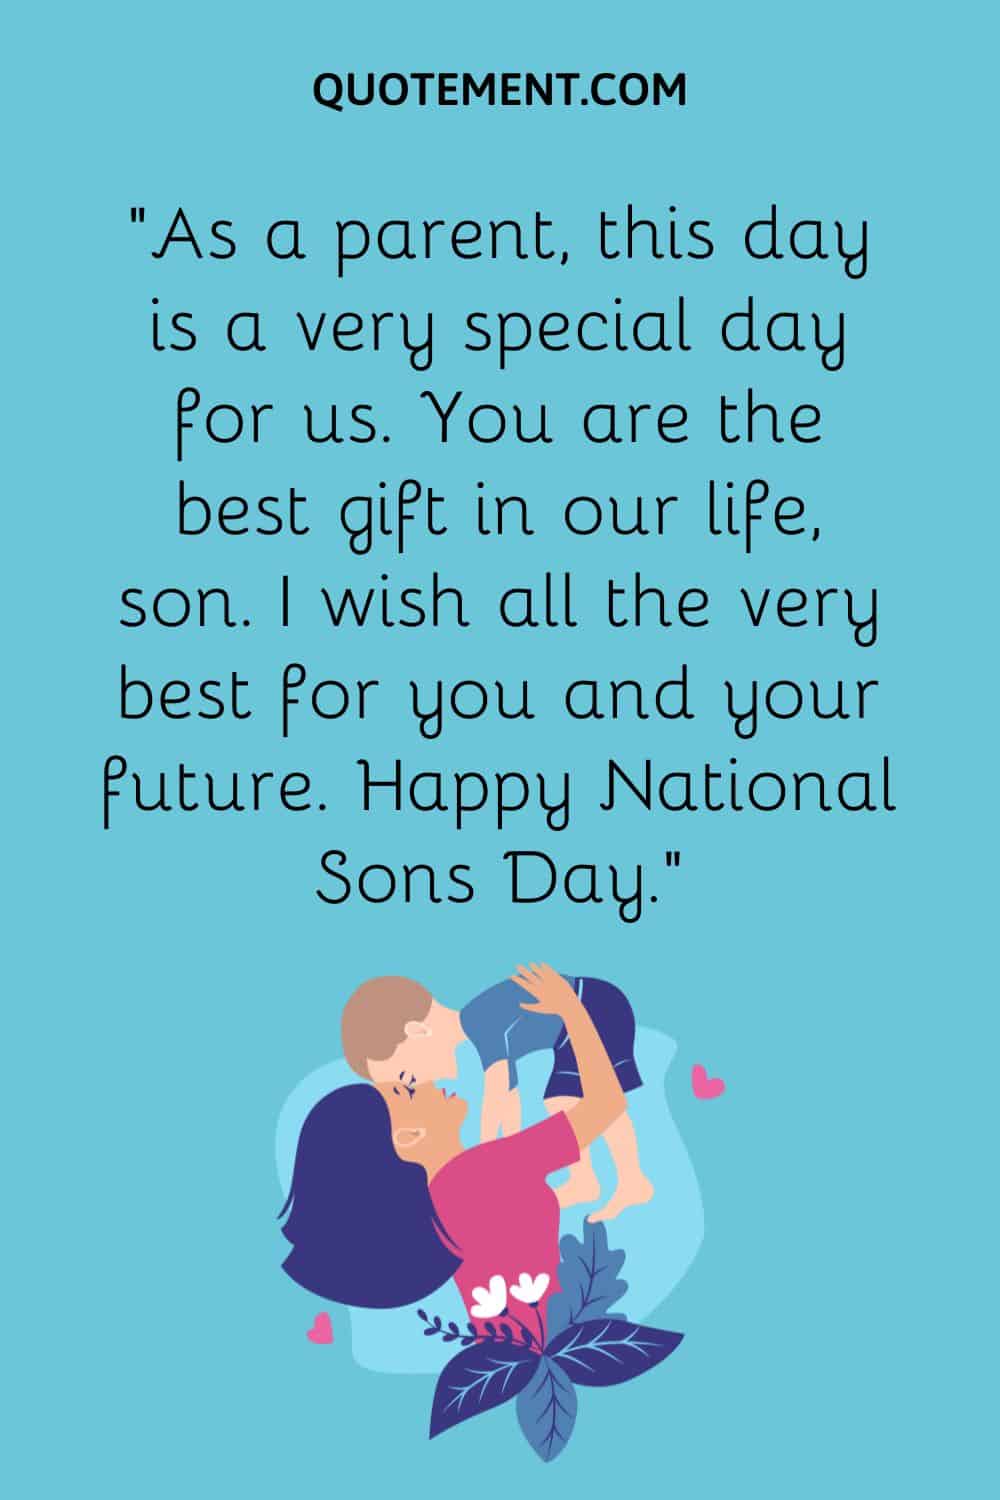 “As a parent, this day is a very special day for us. You are the best gift in our life, son. I wish all the very best for you and your future. Happy National Sons Day.”